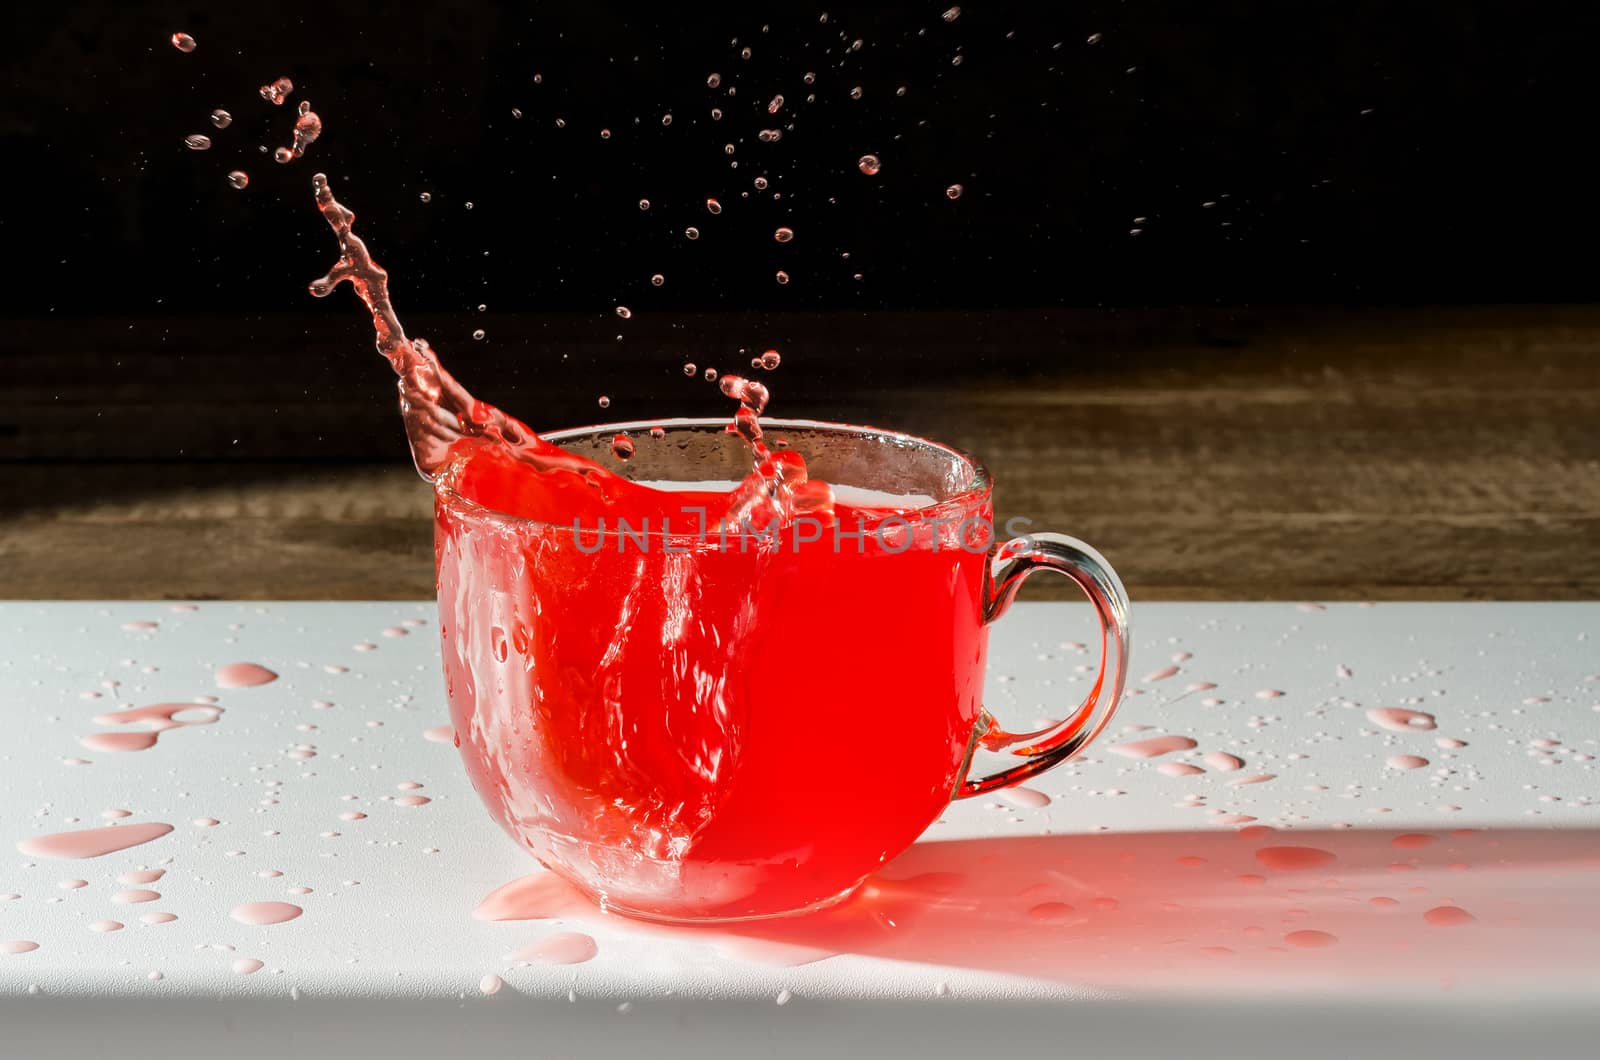 Juice in a Cup and splash with spray on the dark background. White surface, spilled drops and reflection.